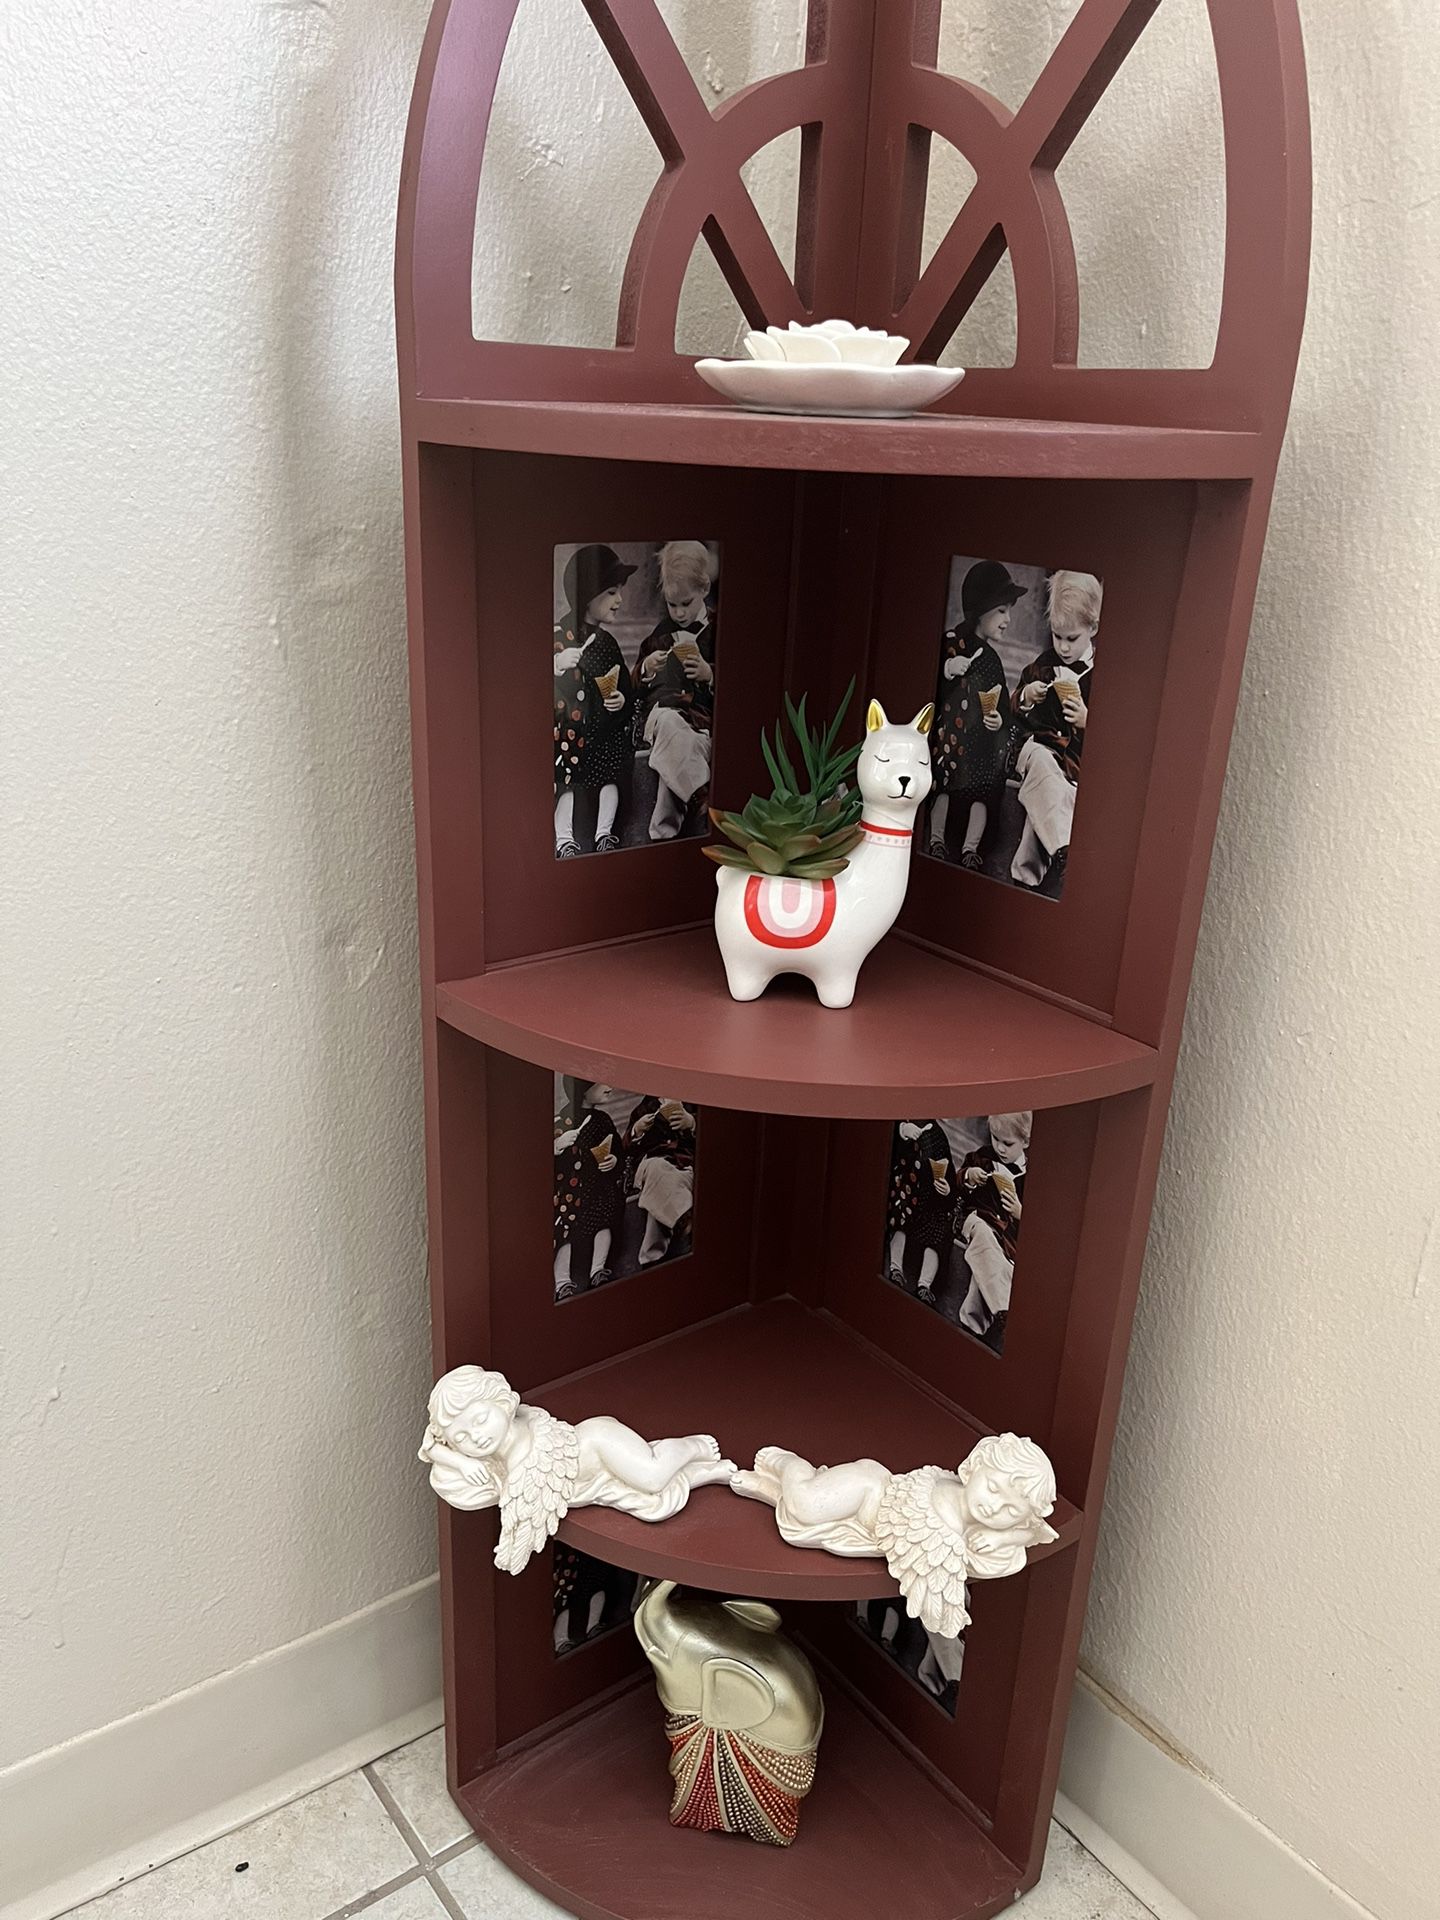 Corner Shelf New You Can Even Add Pictures Not Decorations Very Nice For Mother’s Day Gift $35. Mpu 